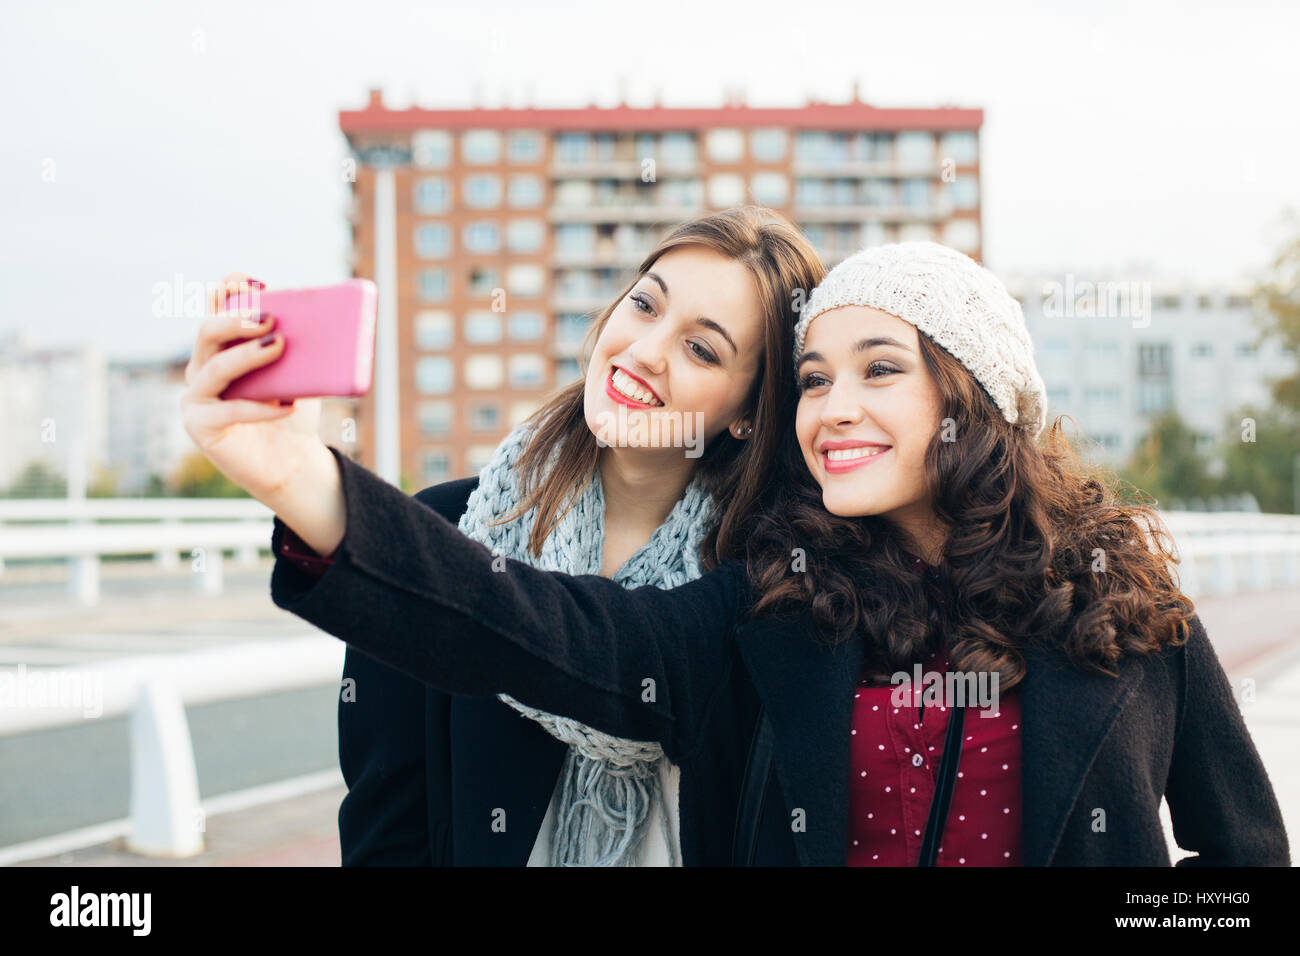 Friends taking selfie with smartphone stock photo